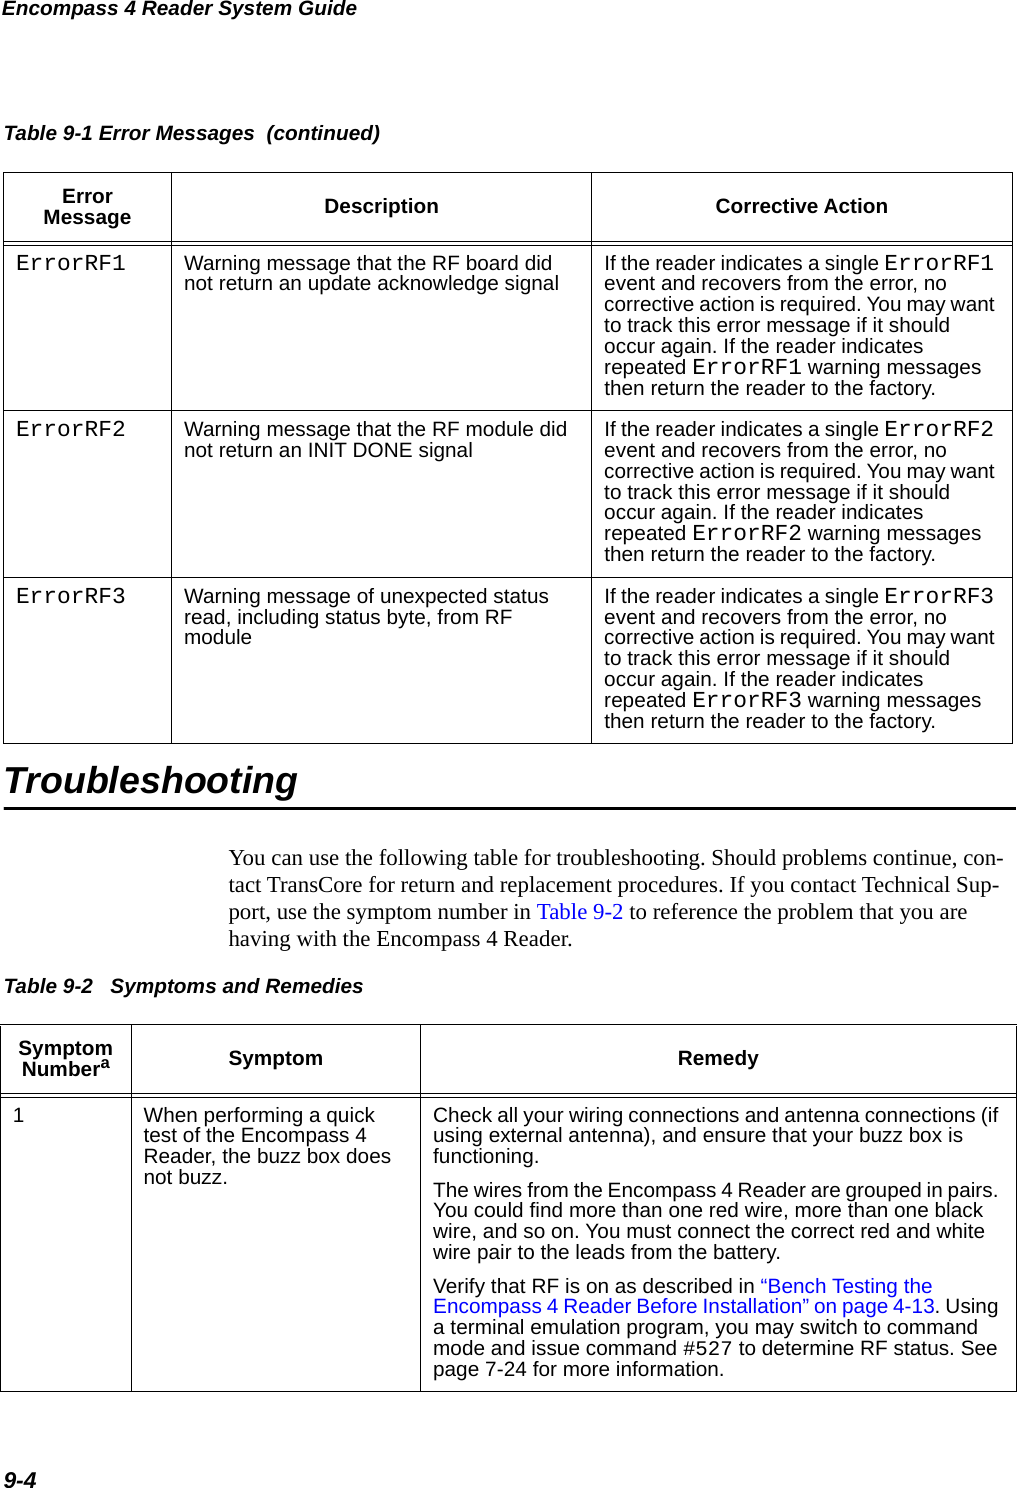 Encompass 4 Reader System Guide9-4TroubleshootingYou can use the following table for troubleshooting. Should problems continue, con-tact TransCore for return and replacement procedures. If you contact Technical Sup-port, use the symptom number in Table 9-2 to reference the problem that you are having with the Encompass 4 Reader. ErrorRF1 Warning message that the RF board did not return an update acknowledge signal If the reader indicates a single ErrorRF1 event and recovers from the error, no corrective action is required. You may want to track this error message if it should occur again. If the reader indicates repeated ErrorRF1 warning messages then return the reader to the factory.ErrorRF2 Warning message that the RF module did not return an INIT DONE signal If the reader indicates a single ErrorRF2 event and recovers from the error, no corrective action is required. You may want to track this error message if it should occur again. If the reader indicates repeated ErrorRF2 warning messages then return the reader to the factory.ErrorRF3 Warning message of unexpected status read, including status byte, from RF moduleIf the reader indicates a single ErrorRF3 event and recovers from the error, no corrective action is required. You may want to track this error message if it should occur again. If the reader indicates repeated ErrorRF3 warning messages then return the reader to the factory.Table 9-1 Error Messages  (continued)Error Message Description Corrective ActionTable 9-2   Symptoms and Remedies Symptom NumberaSymptom Remedy1When performing a quick test of the Encompass 4 Reader, the buzz box does not buzz.Check all your wiring connections and antenna connections (if using external antenna), and ensure that your buzz box is functioning. The wires from the Encompass 4 Reader are grouped in pairs. You could find more than one red wire, more than one black wire, and so on. You must connect the correct red and white wire pair to the leads from the battery. Verify that RF is on as described in “Bench Testing the Encompass 4 Reader Before Installation” on page 4-13. Using a terminal emulation program, you may switch to command mode and issue command #527 to determine RF status. See page 7-24 for more information.